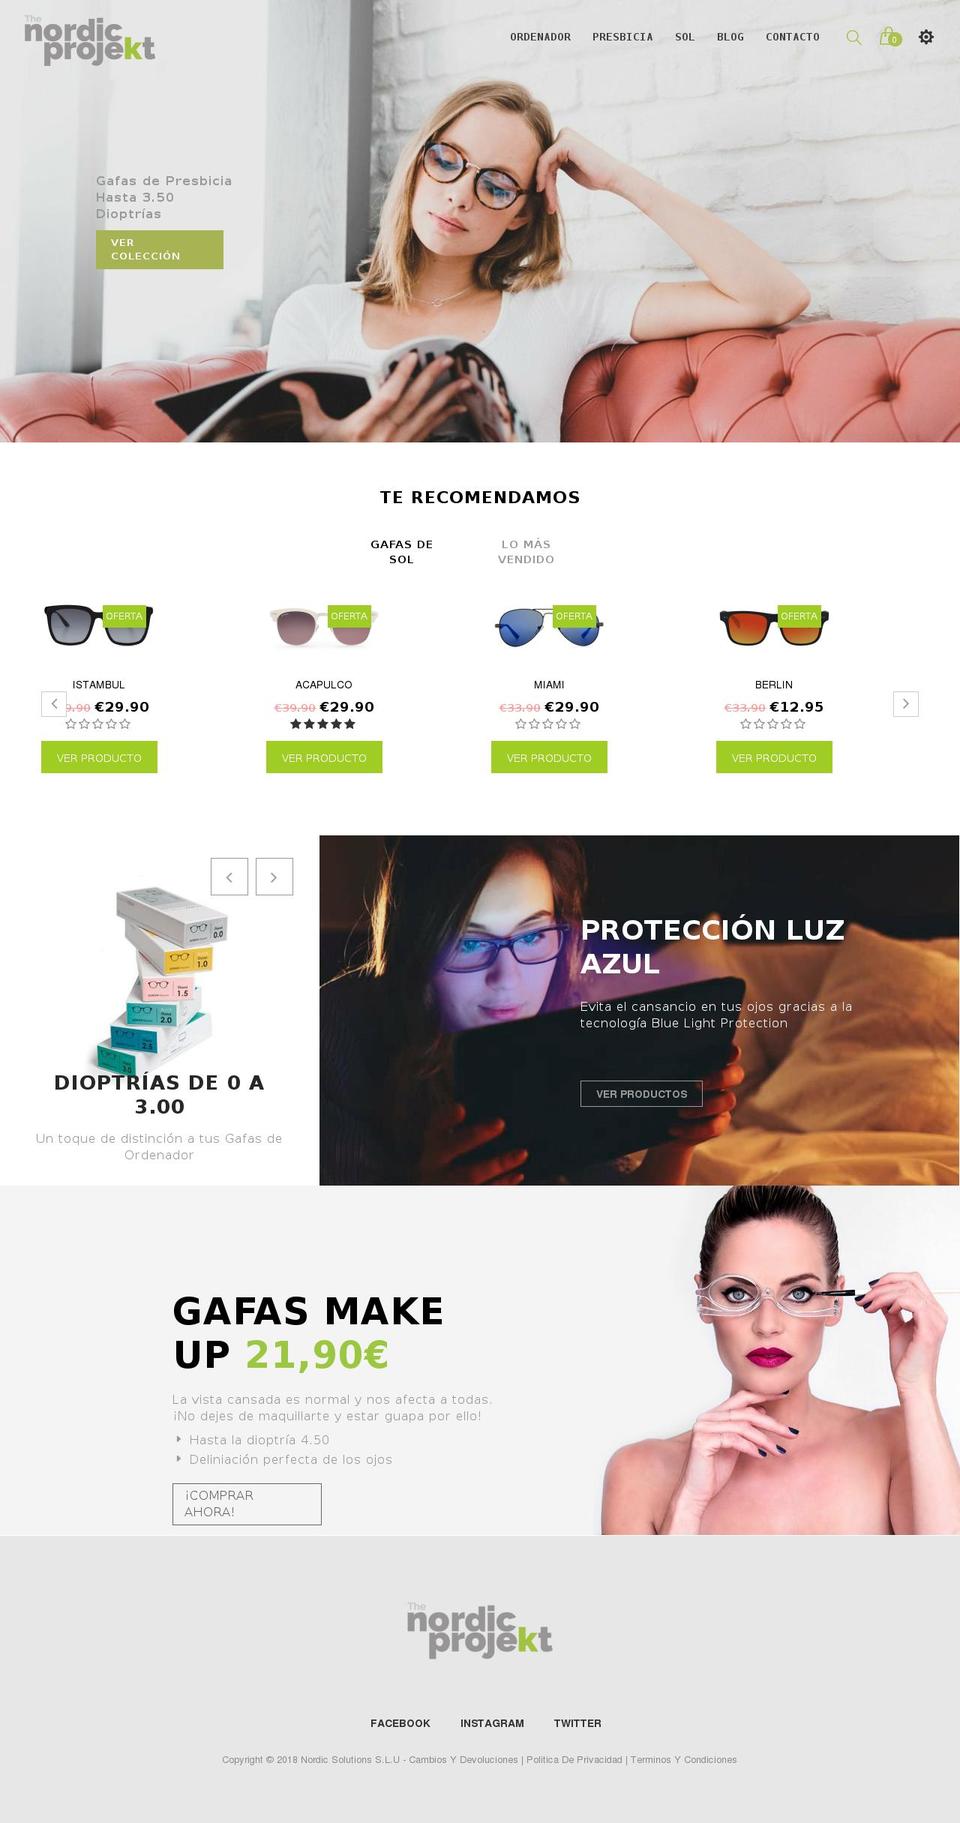 Copy of myshopify-themes-logancee-08-ver1-2 Shopify theme site example nordicprojekt.com